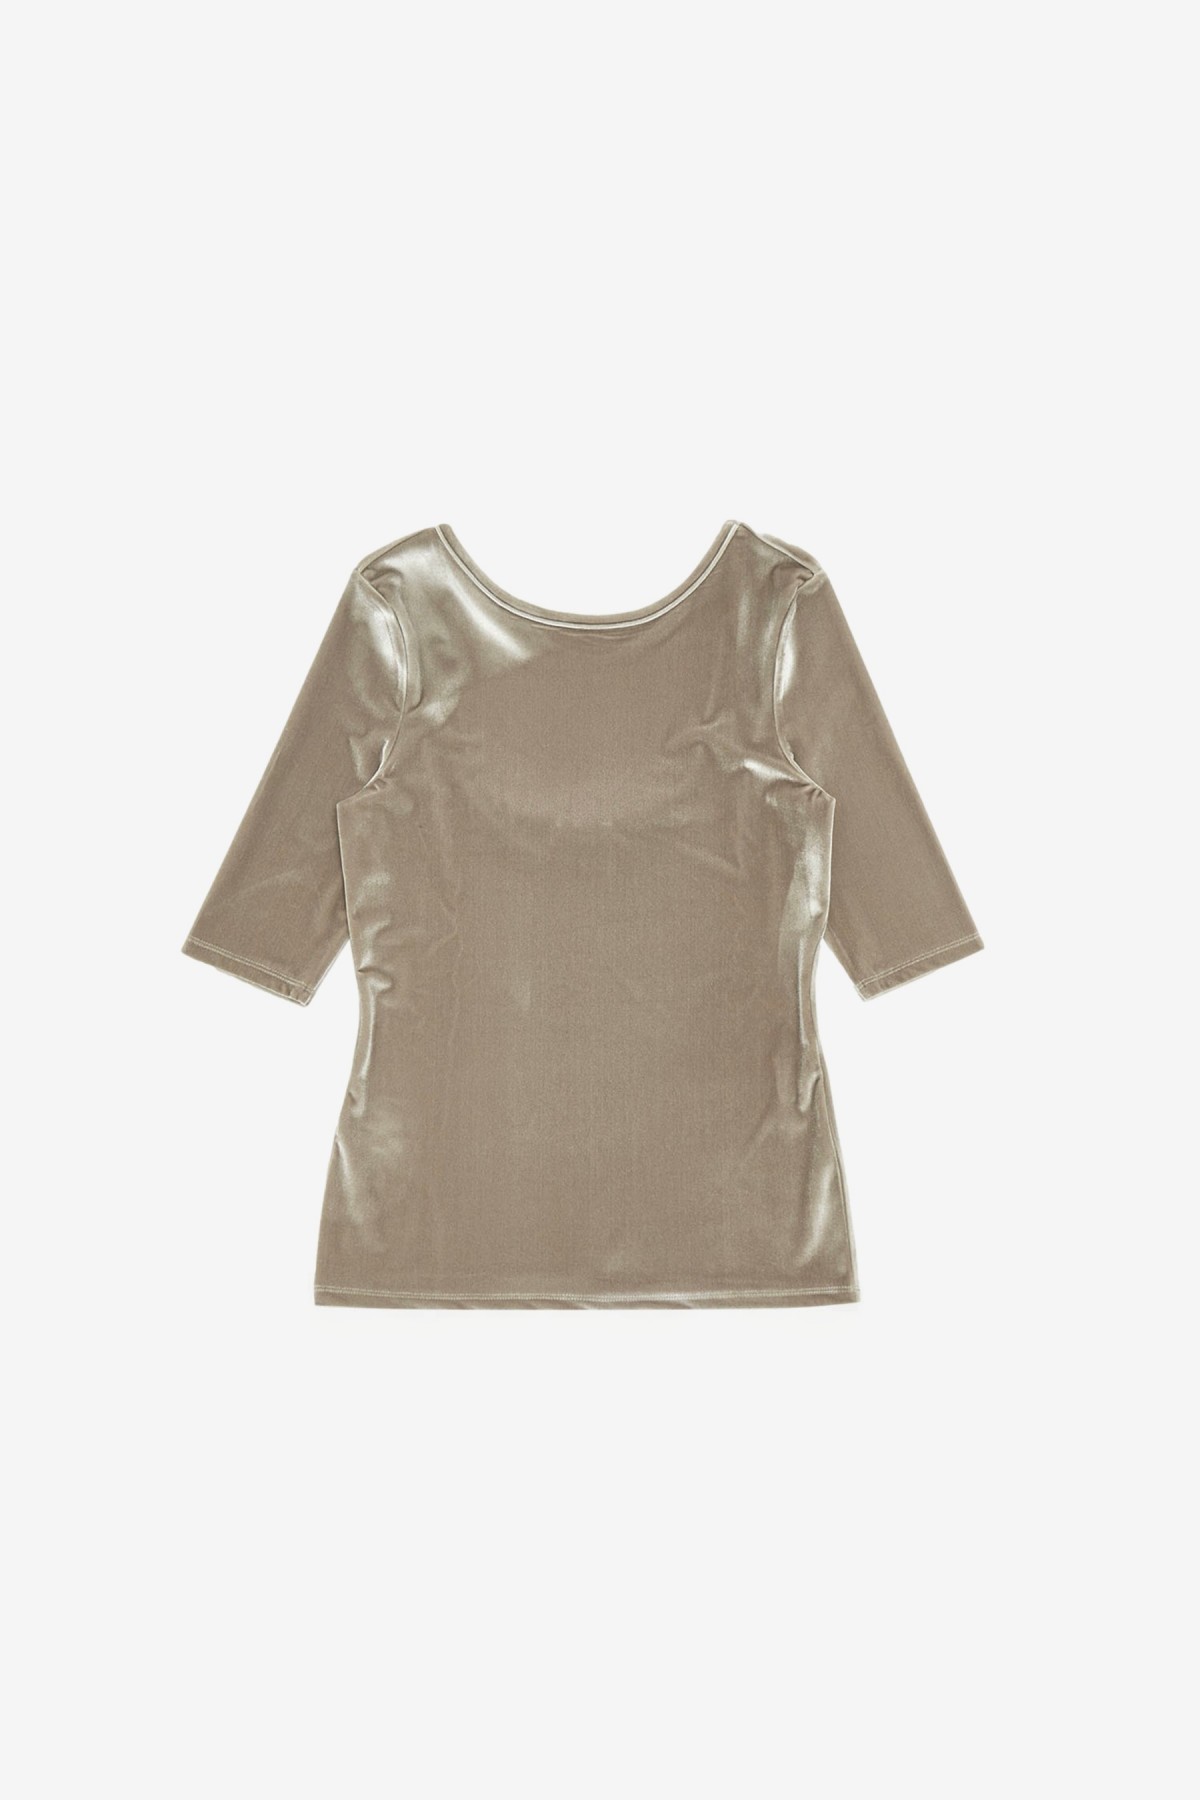 Amomento Back Cut Out T-Shirt in Beige